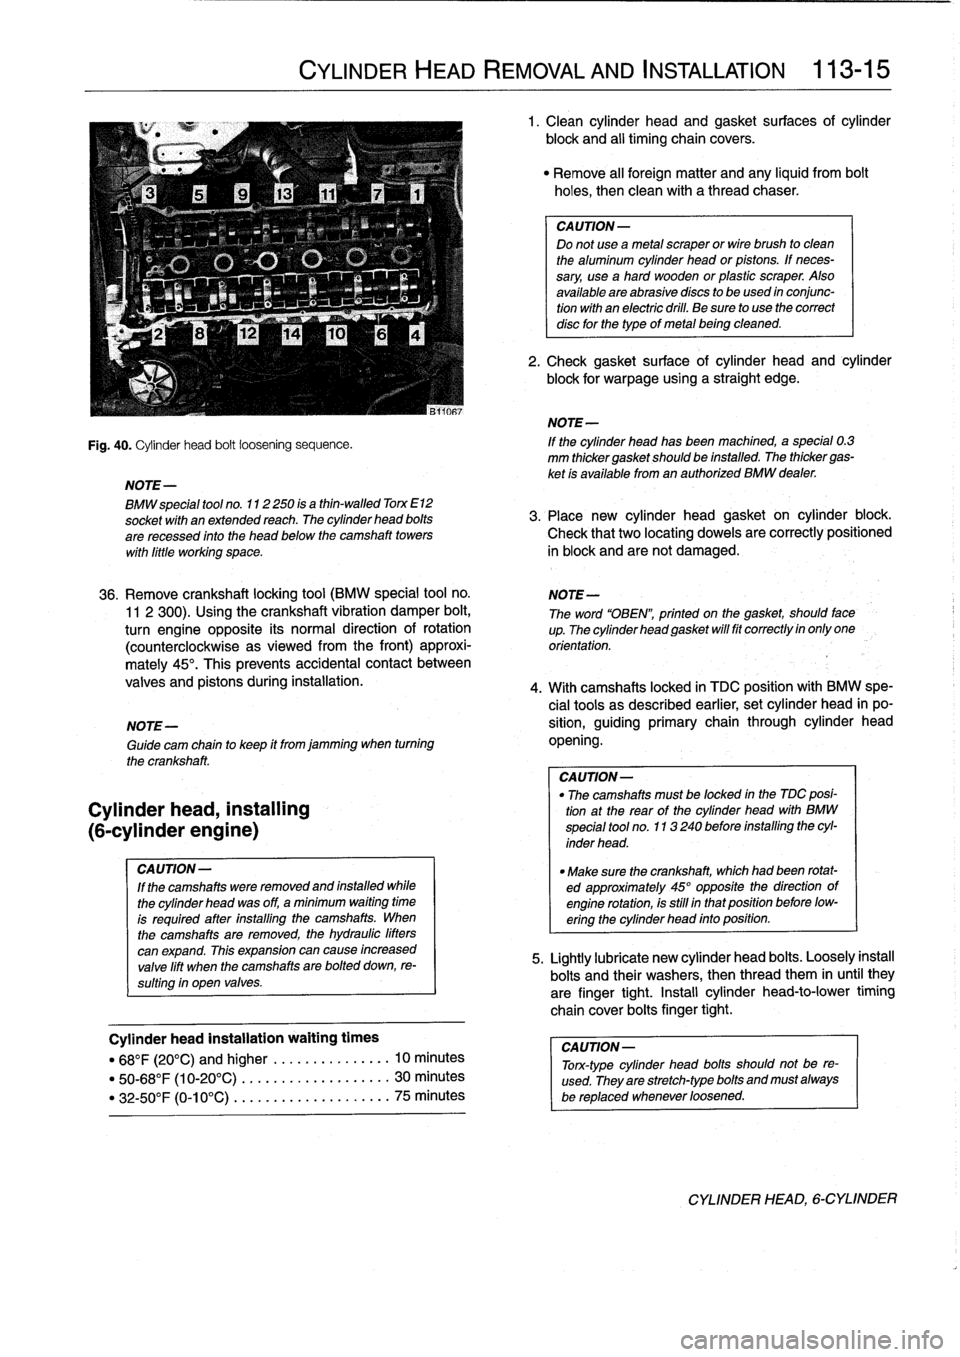 BMW 325i 1993 E36 Workshop Manual 
NOTE-

Cylinder
head,
installing

(6-cylinder
engine)

CAUTION-

If
the
camshafts
were
removed
and
installed
while

the
cylinder
head
was
off,
a
minimum
waiting
time

is
required
after
ínstalling
th